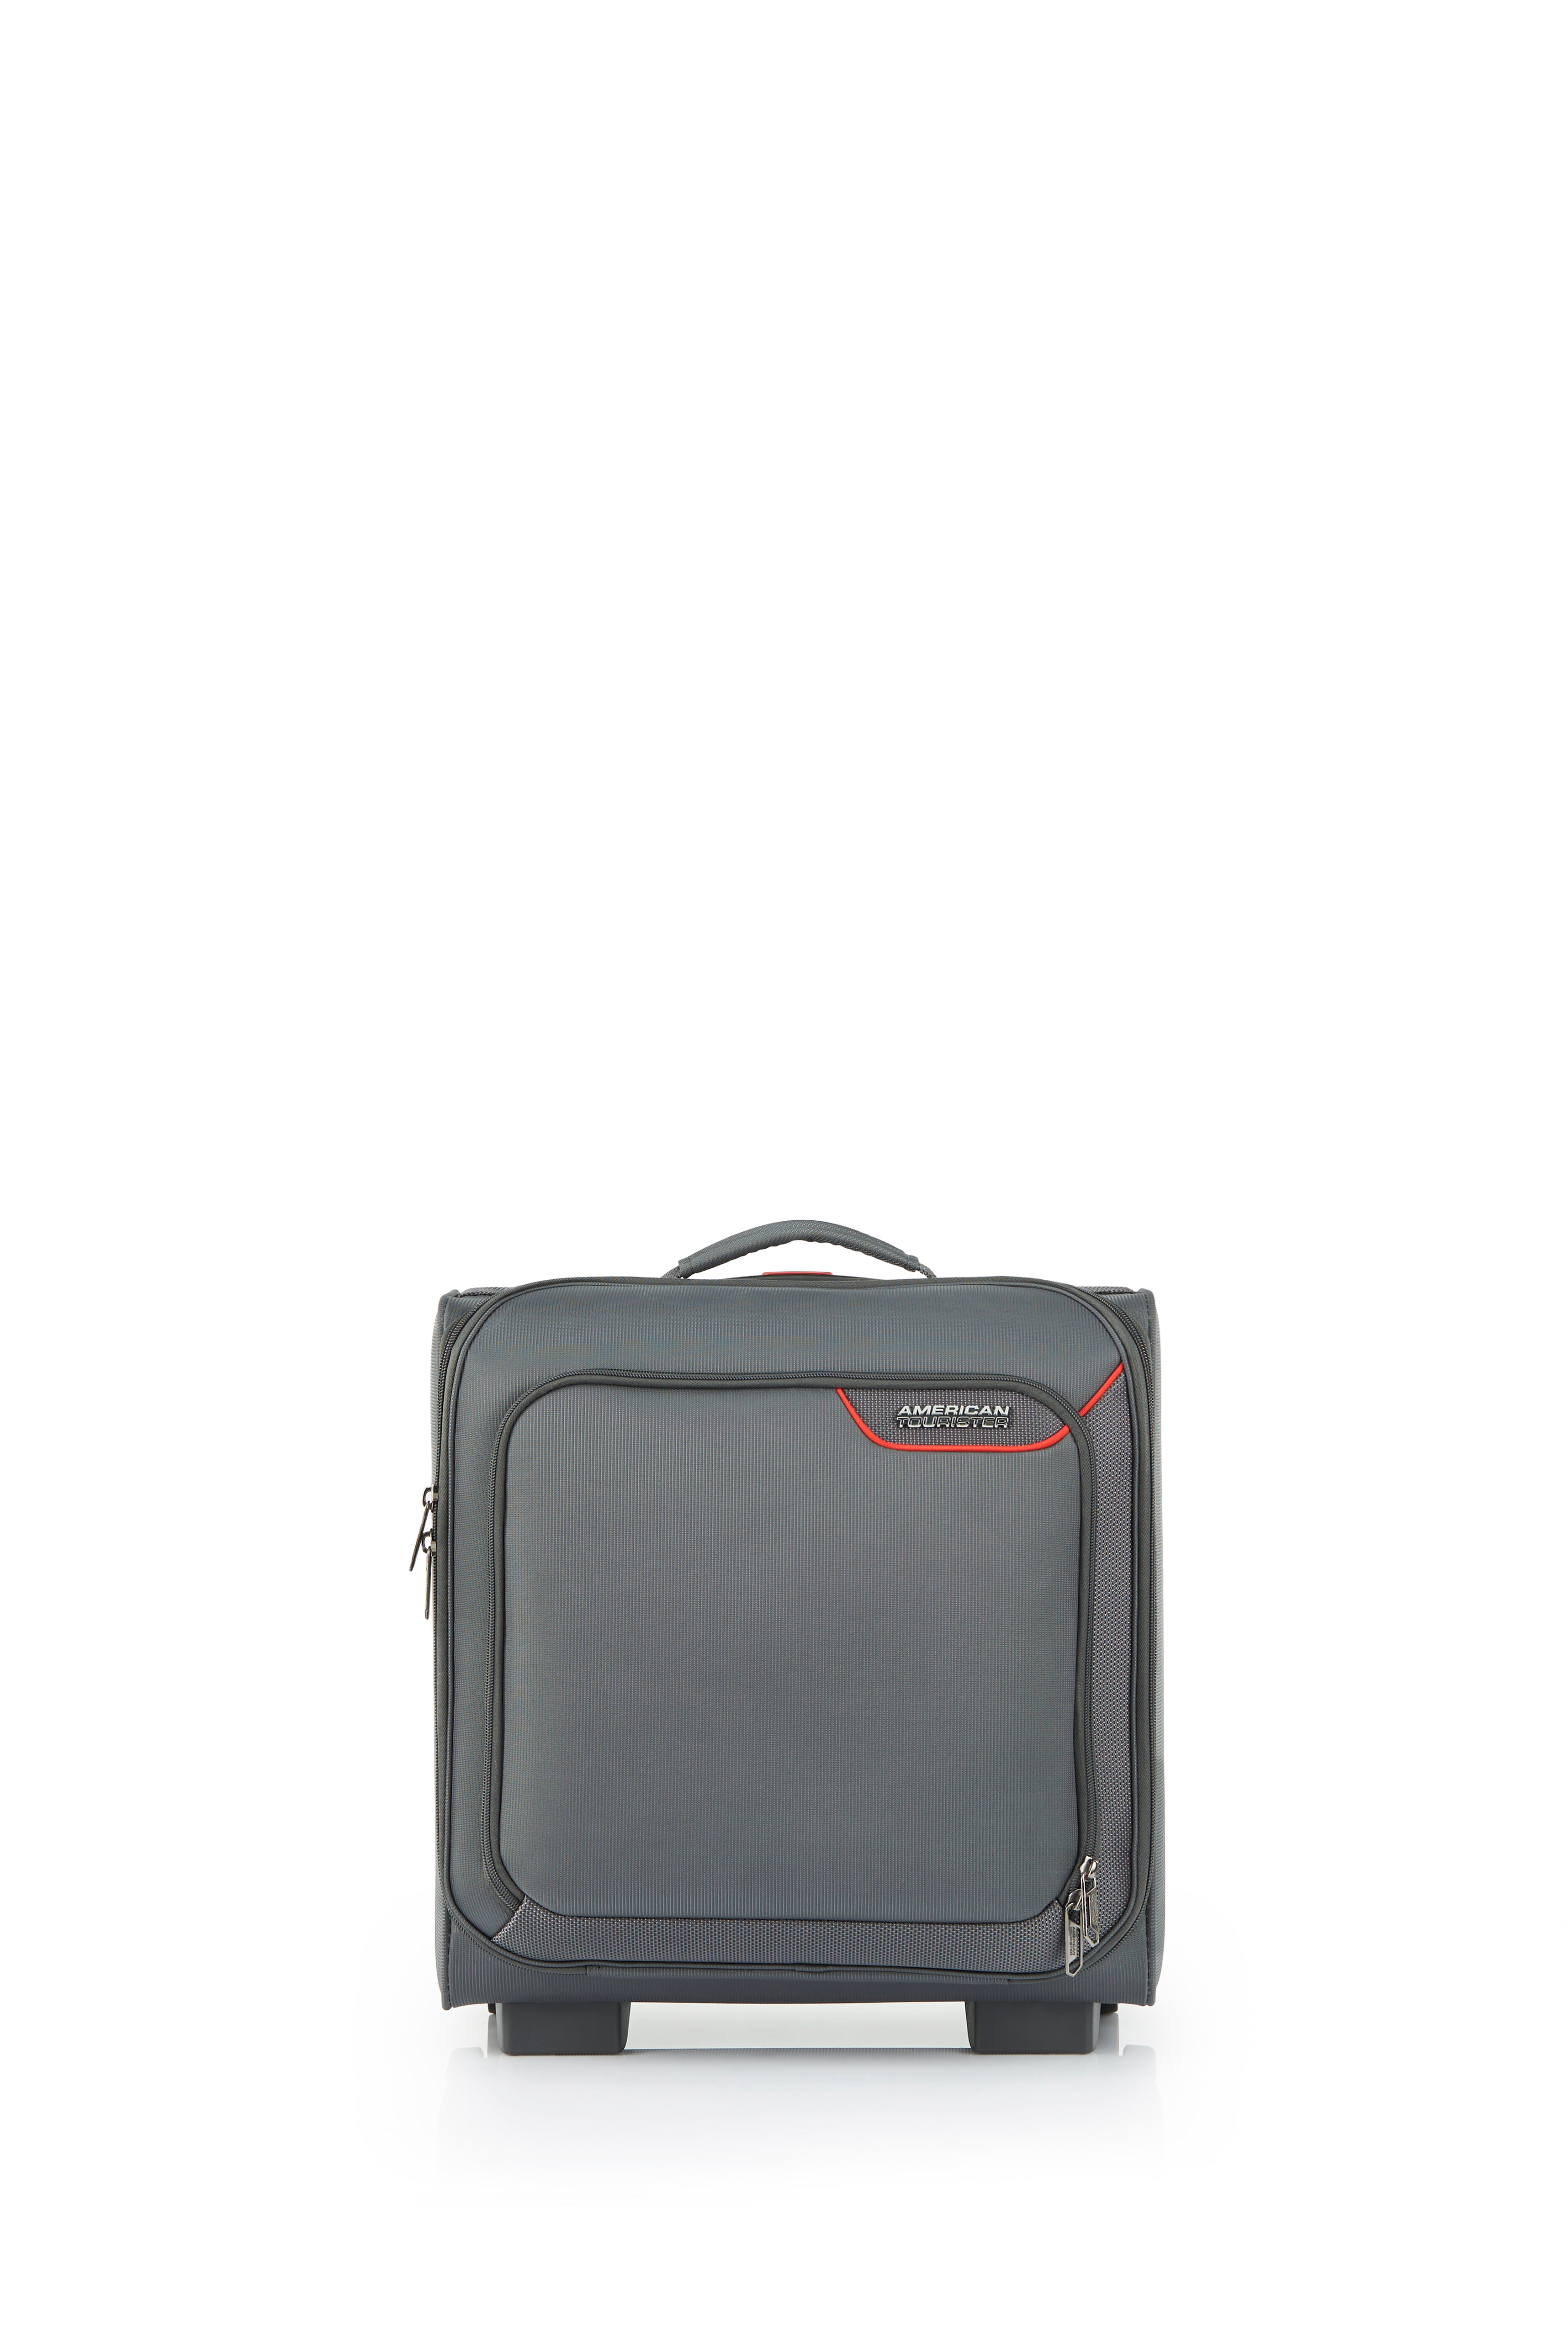 American Tourister - Applite ECO Underseater Suitcase - Grey/Red - 0